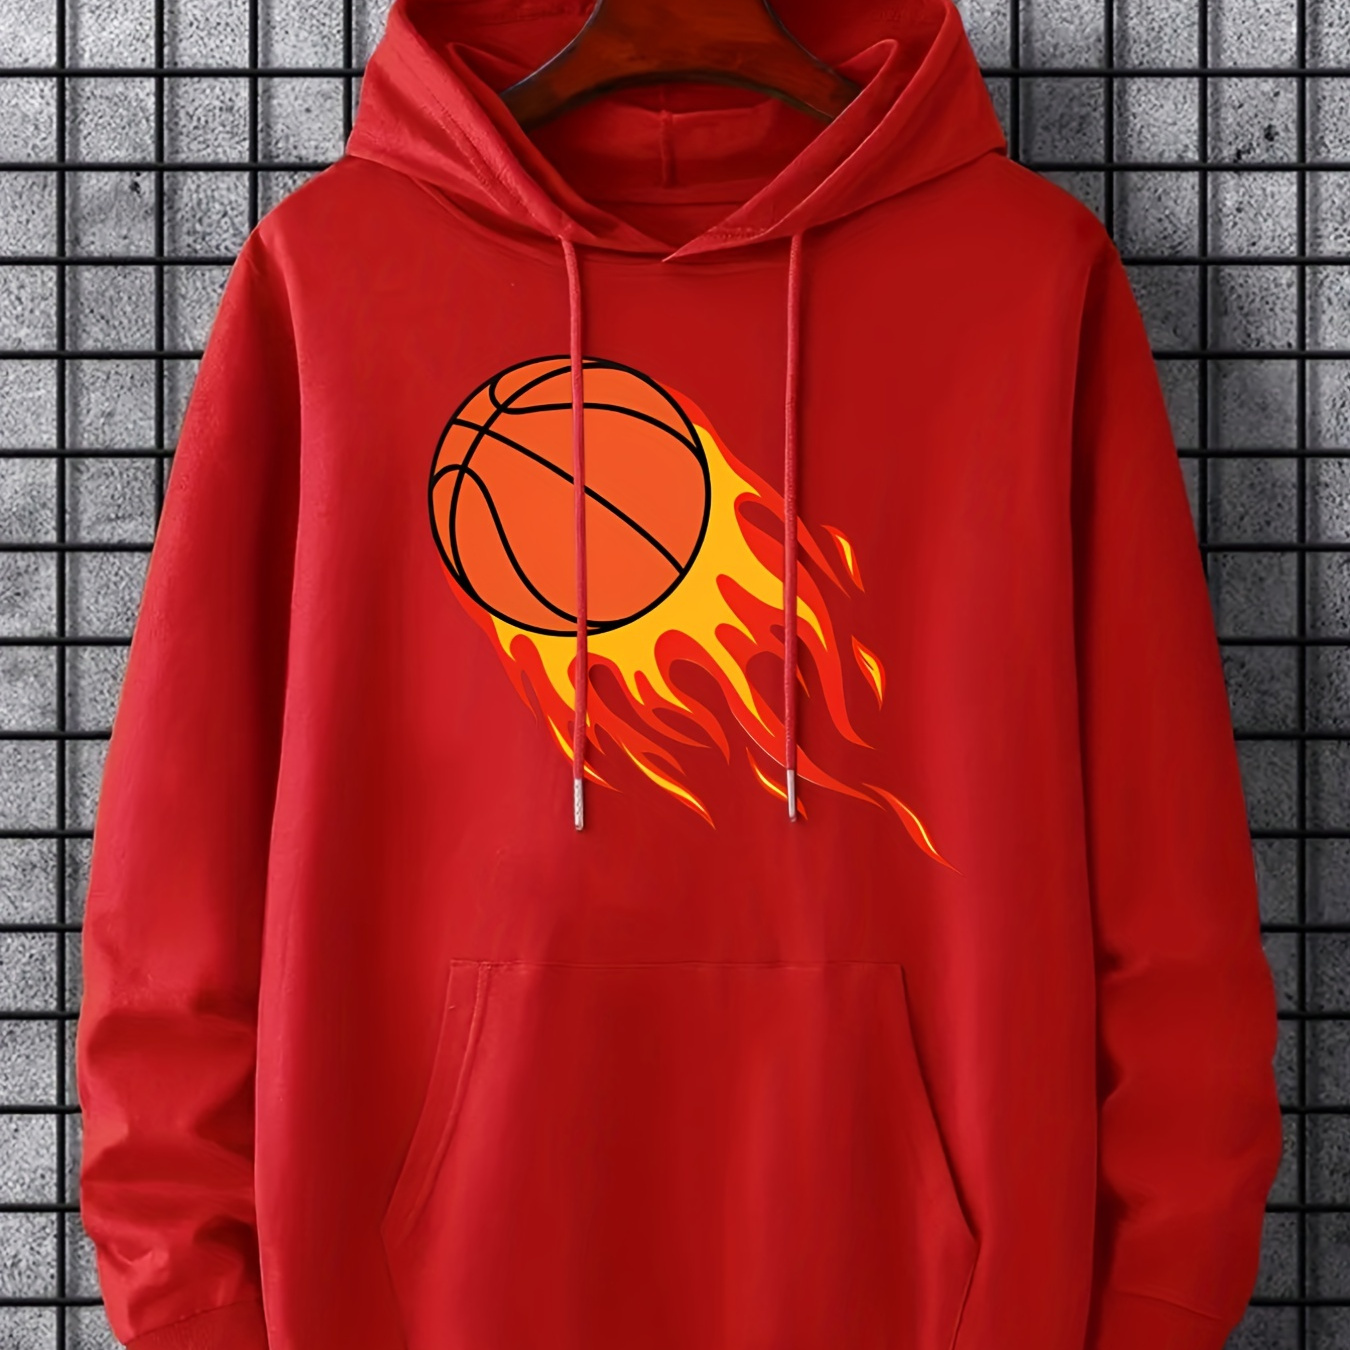 

Basketball On Fire Print Hoodie, Hoodies For Men, Men's Casual Graphic Design Pullover Hooded Sweatshirt With Kangaroo Pocket Streetwear For Winter Fall, As Gifts